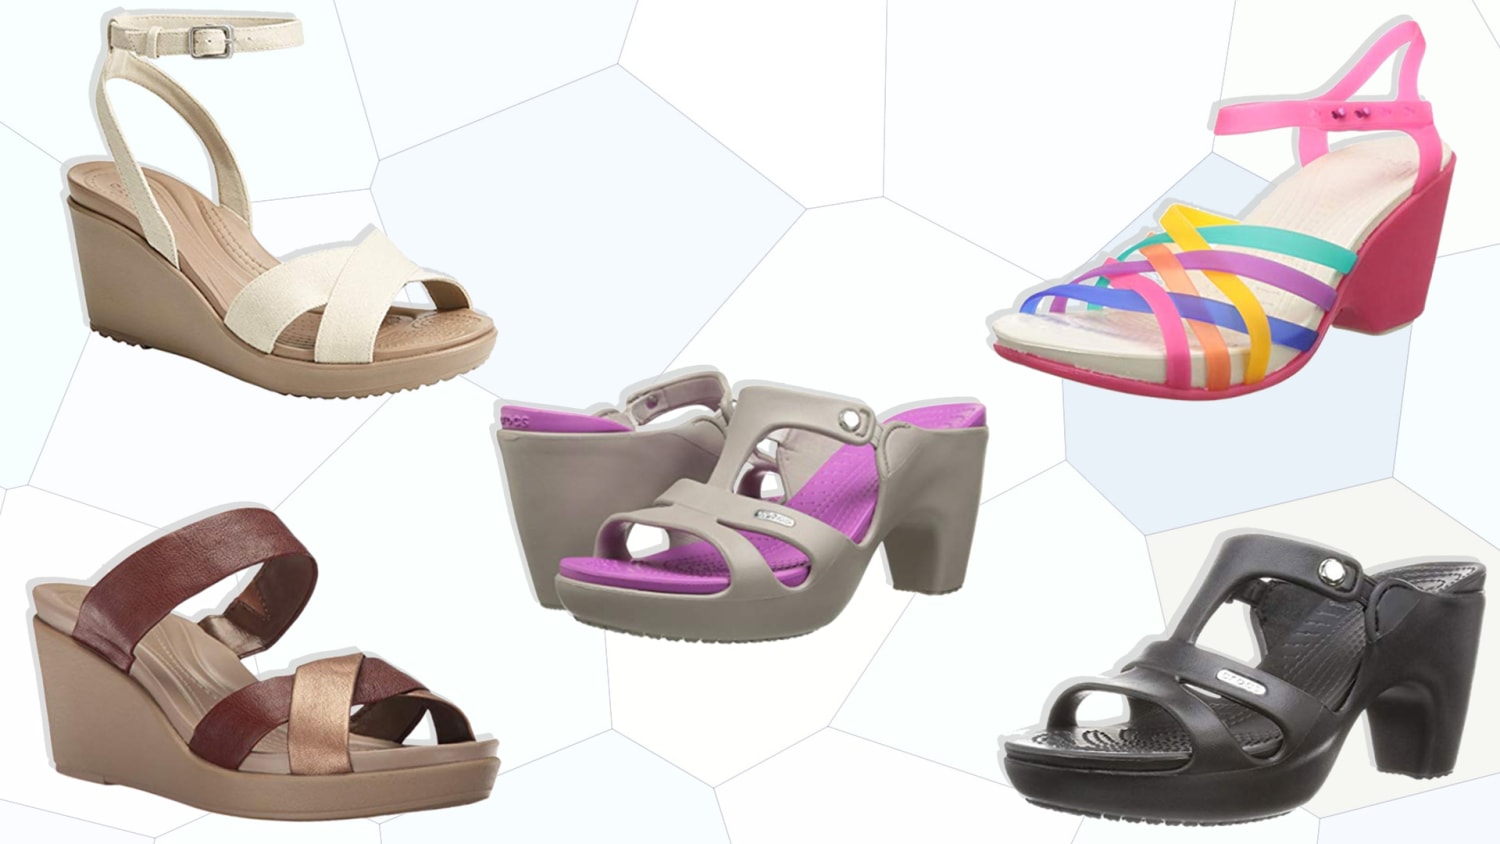 Buy Crocs Sandals online in India at Mochi Shoes